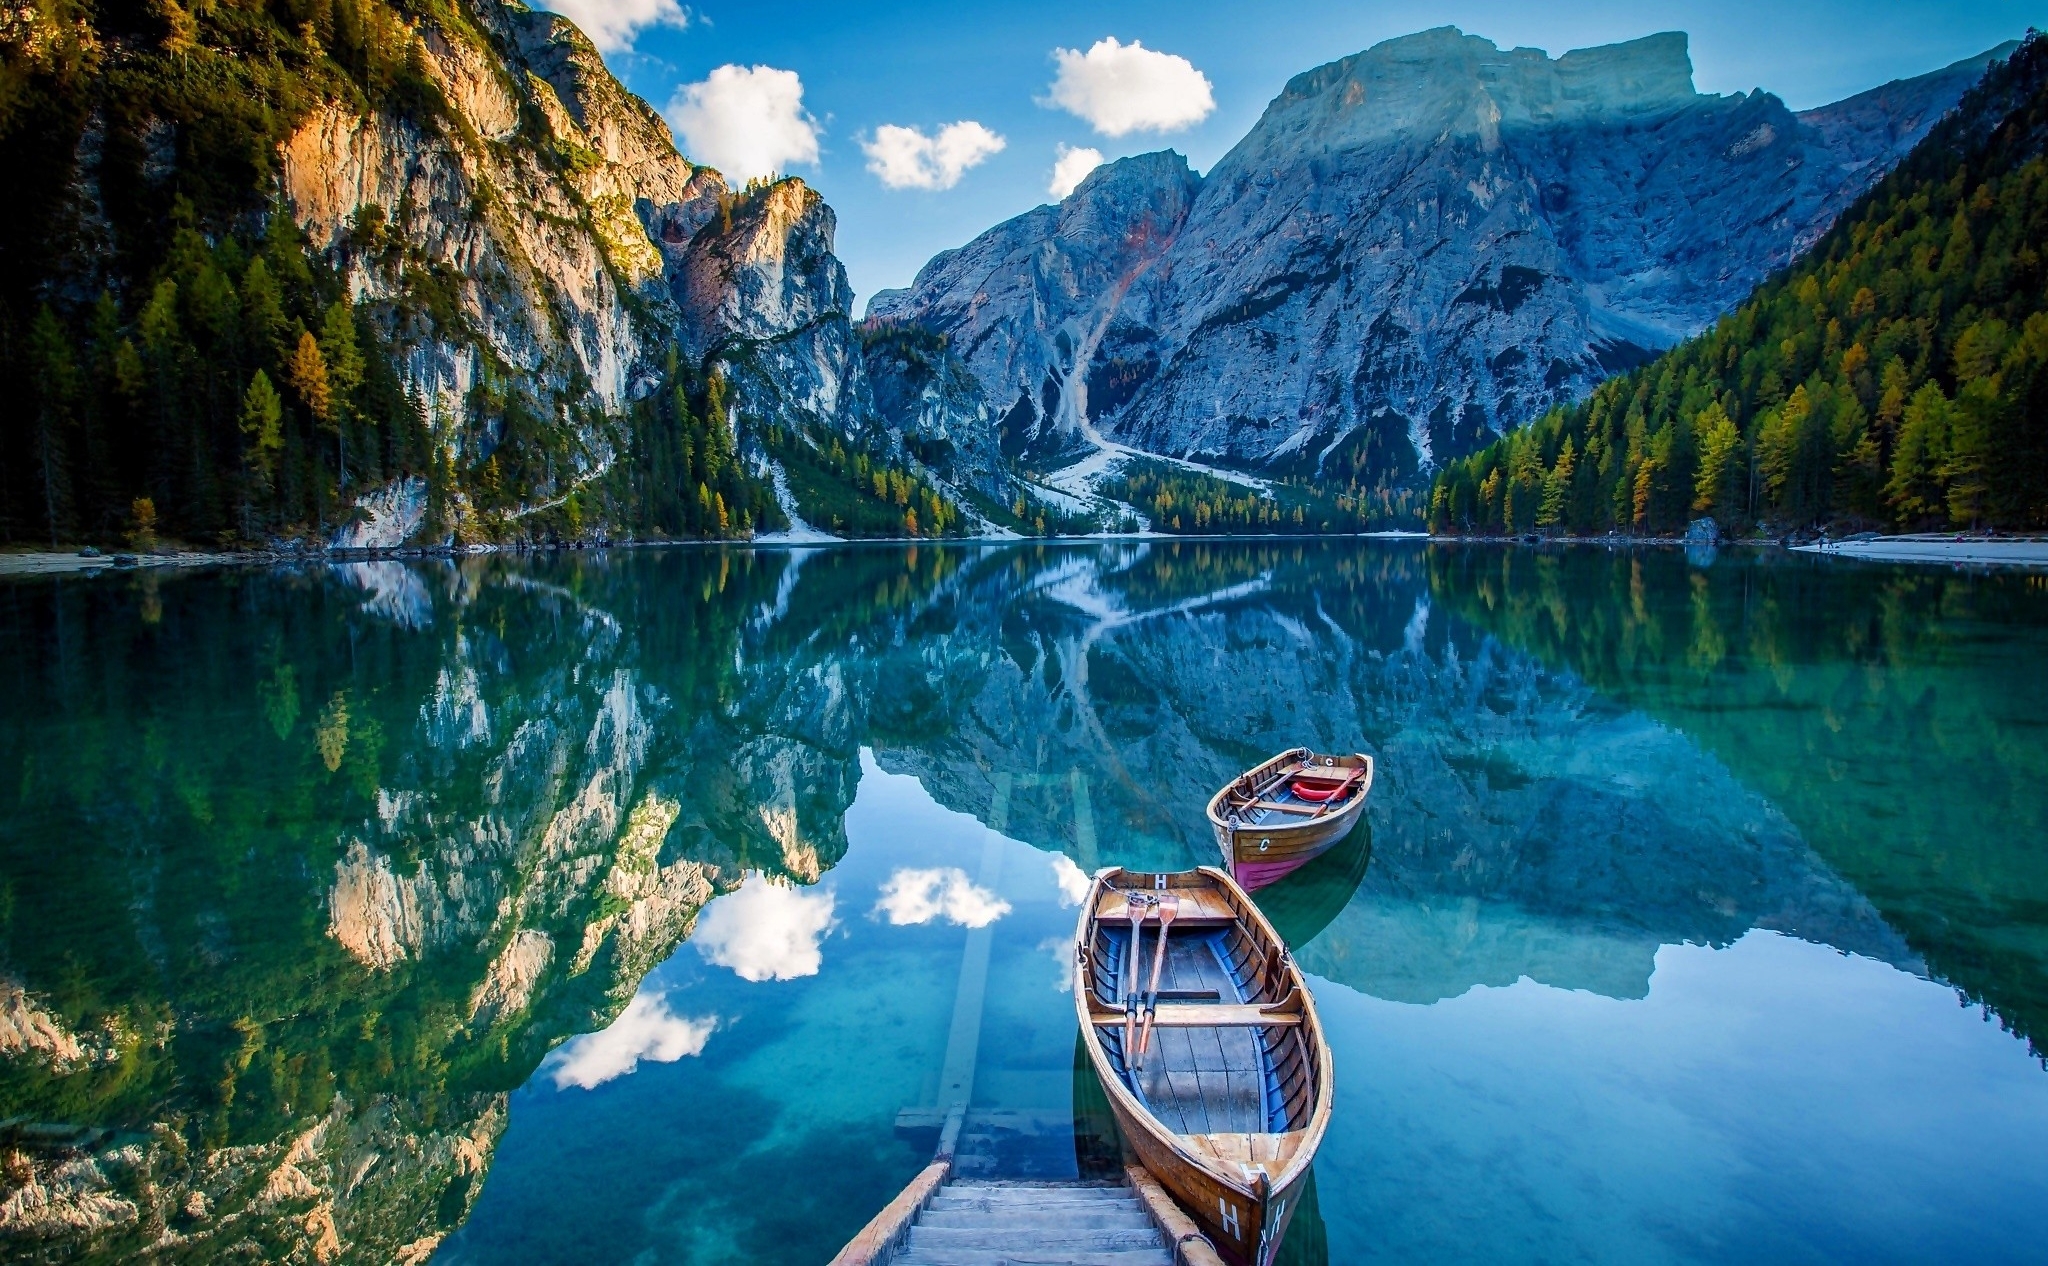 General 2048x1266 landscape mountains lagoon boat nature clear sky bridge reflection environment water vehicle Italy Pragser Wildsee clouds sky trees South Tyrol